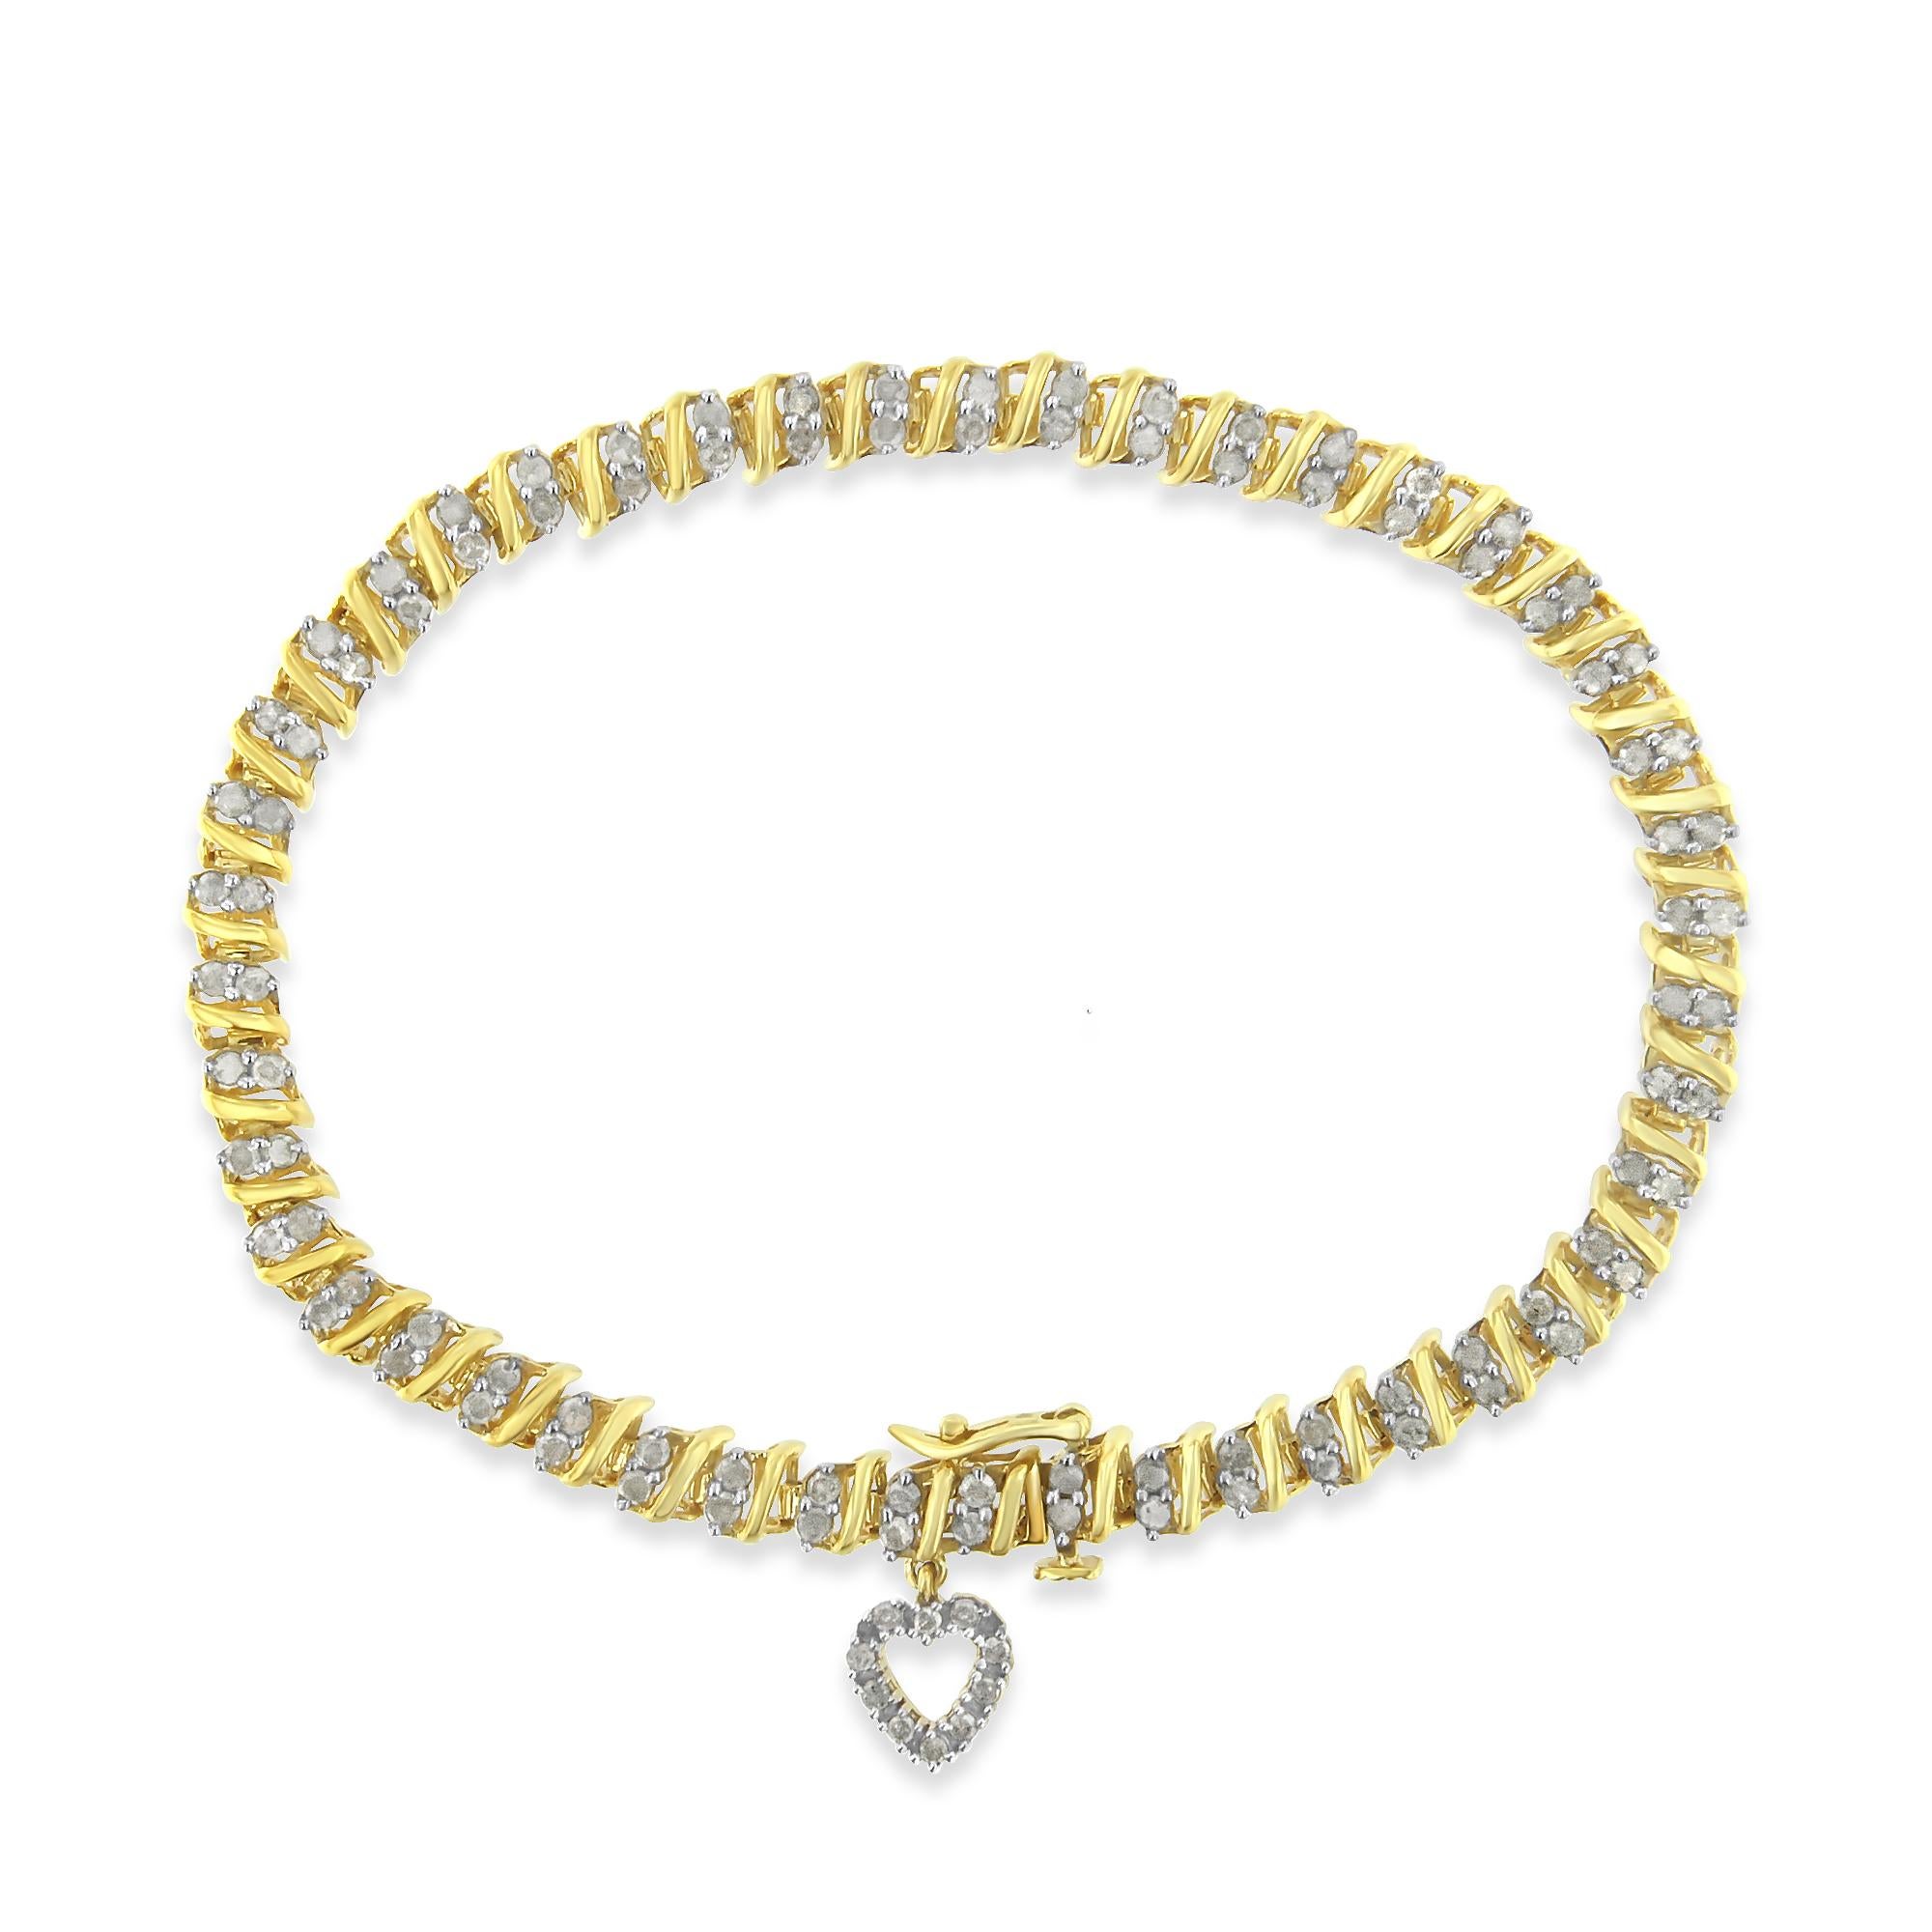 Contemporary Yellow Gold Over Sterling Silver 2.0 Carat Diamond Heart Charm Link Bracelet For Sale